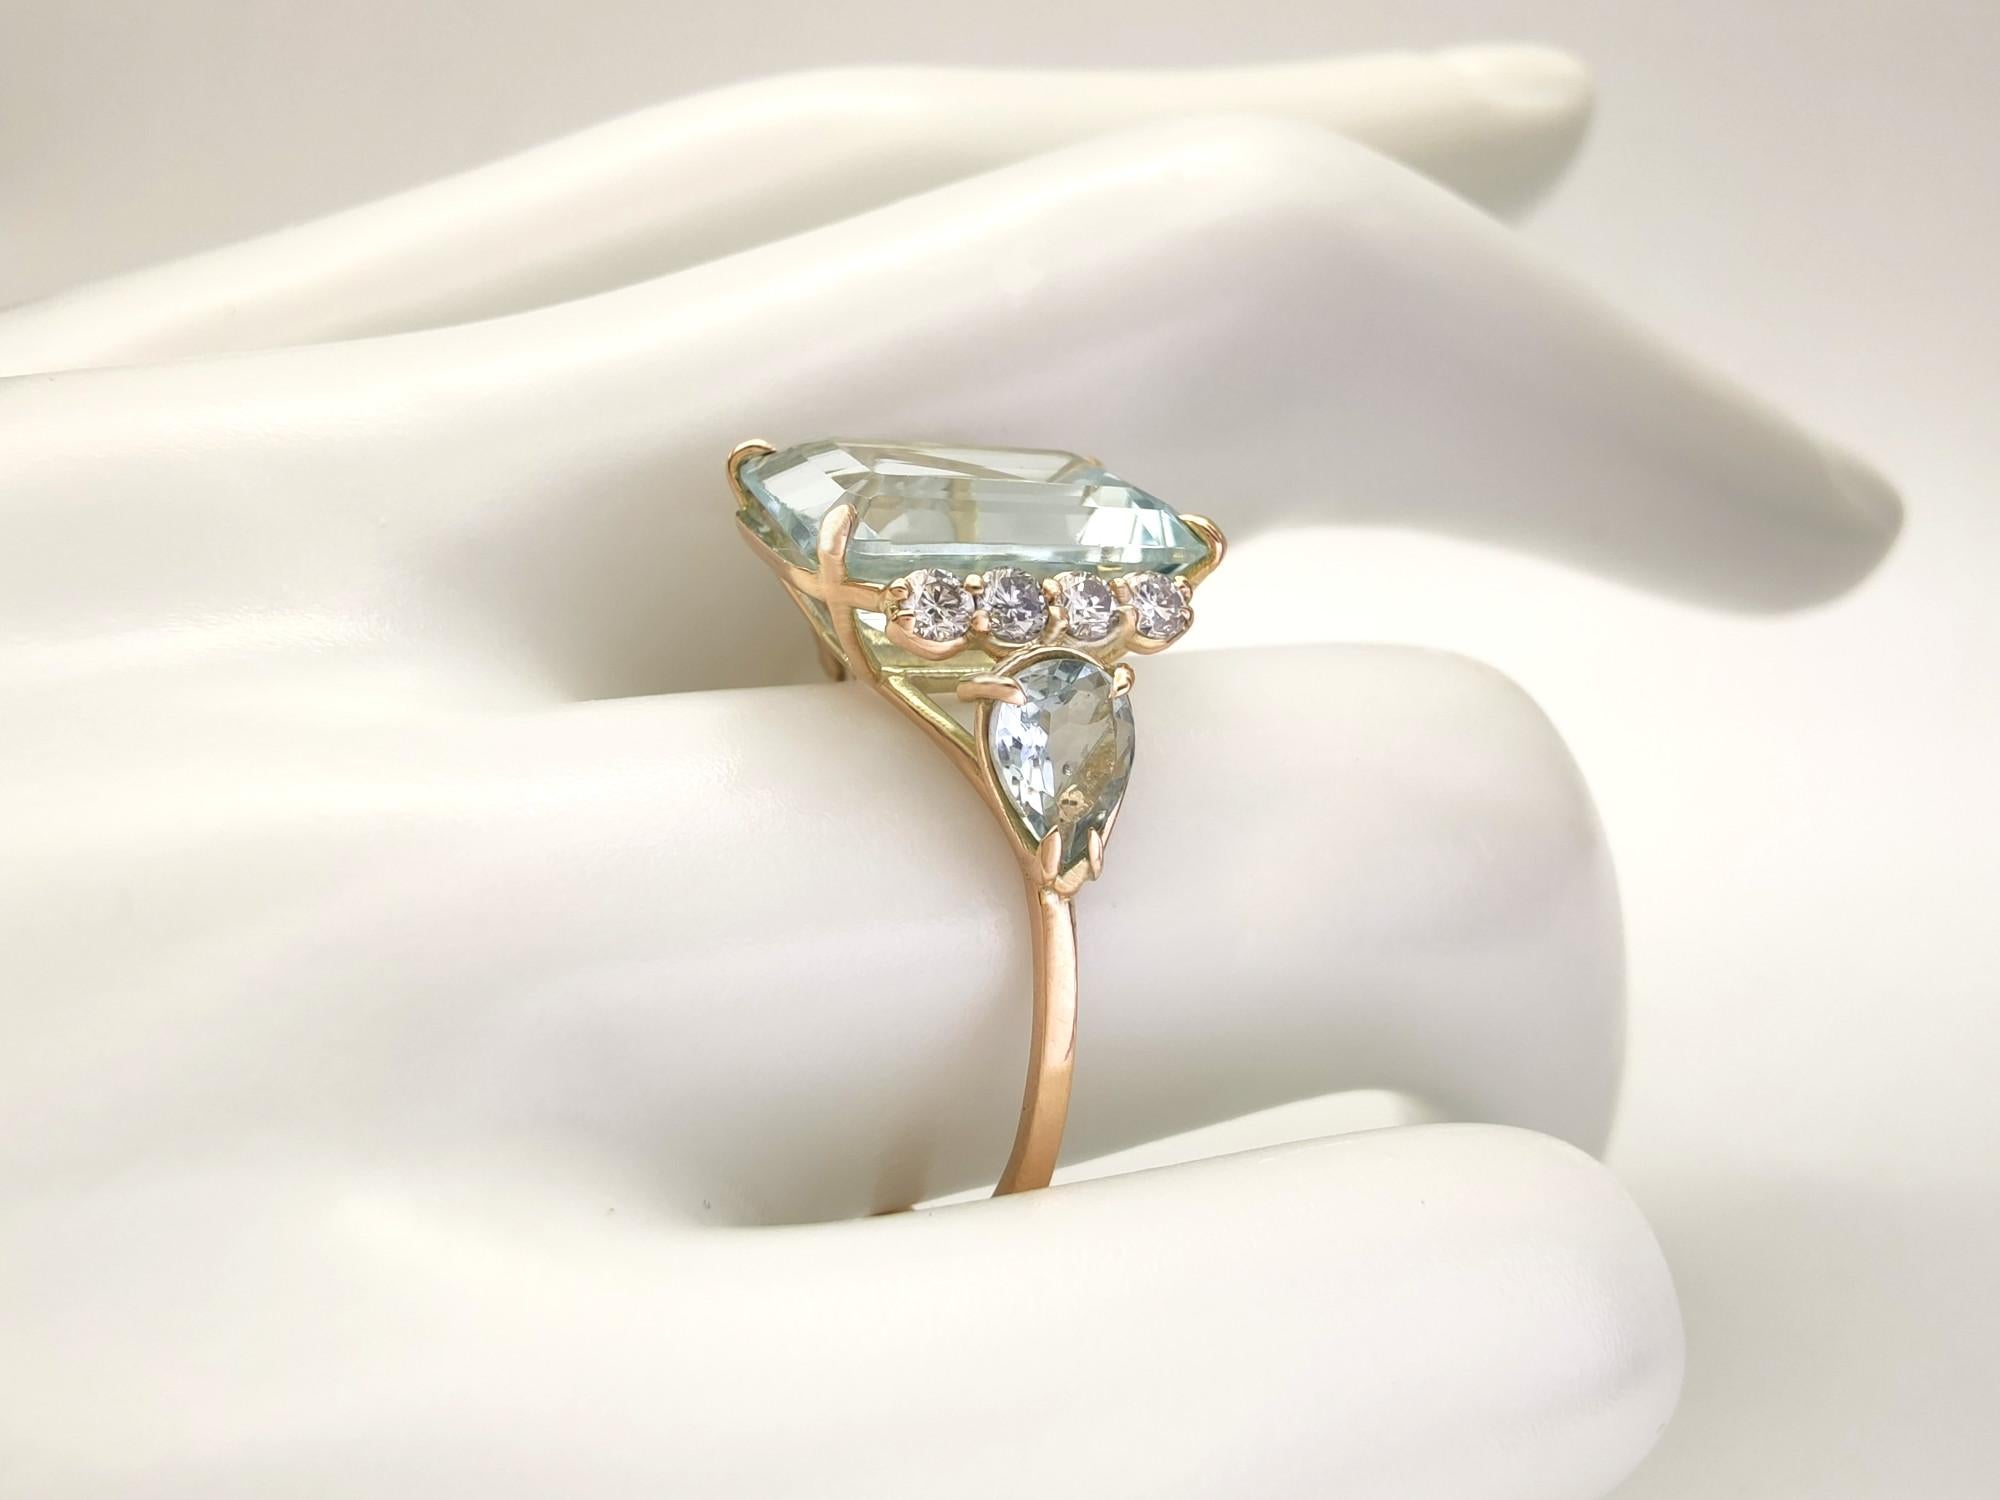 Contemporary Women's 14K Gold Ring Aquamarine and Diamonds Perfect for Proposals Engagements